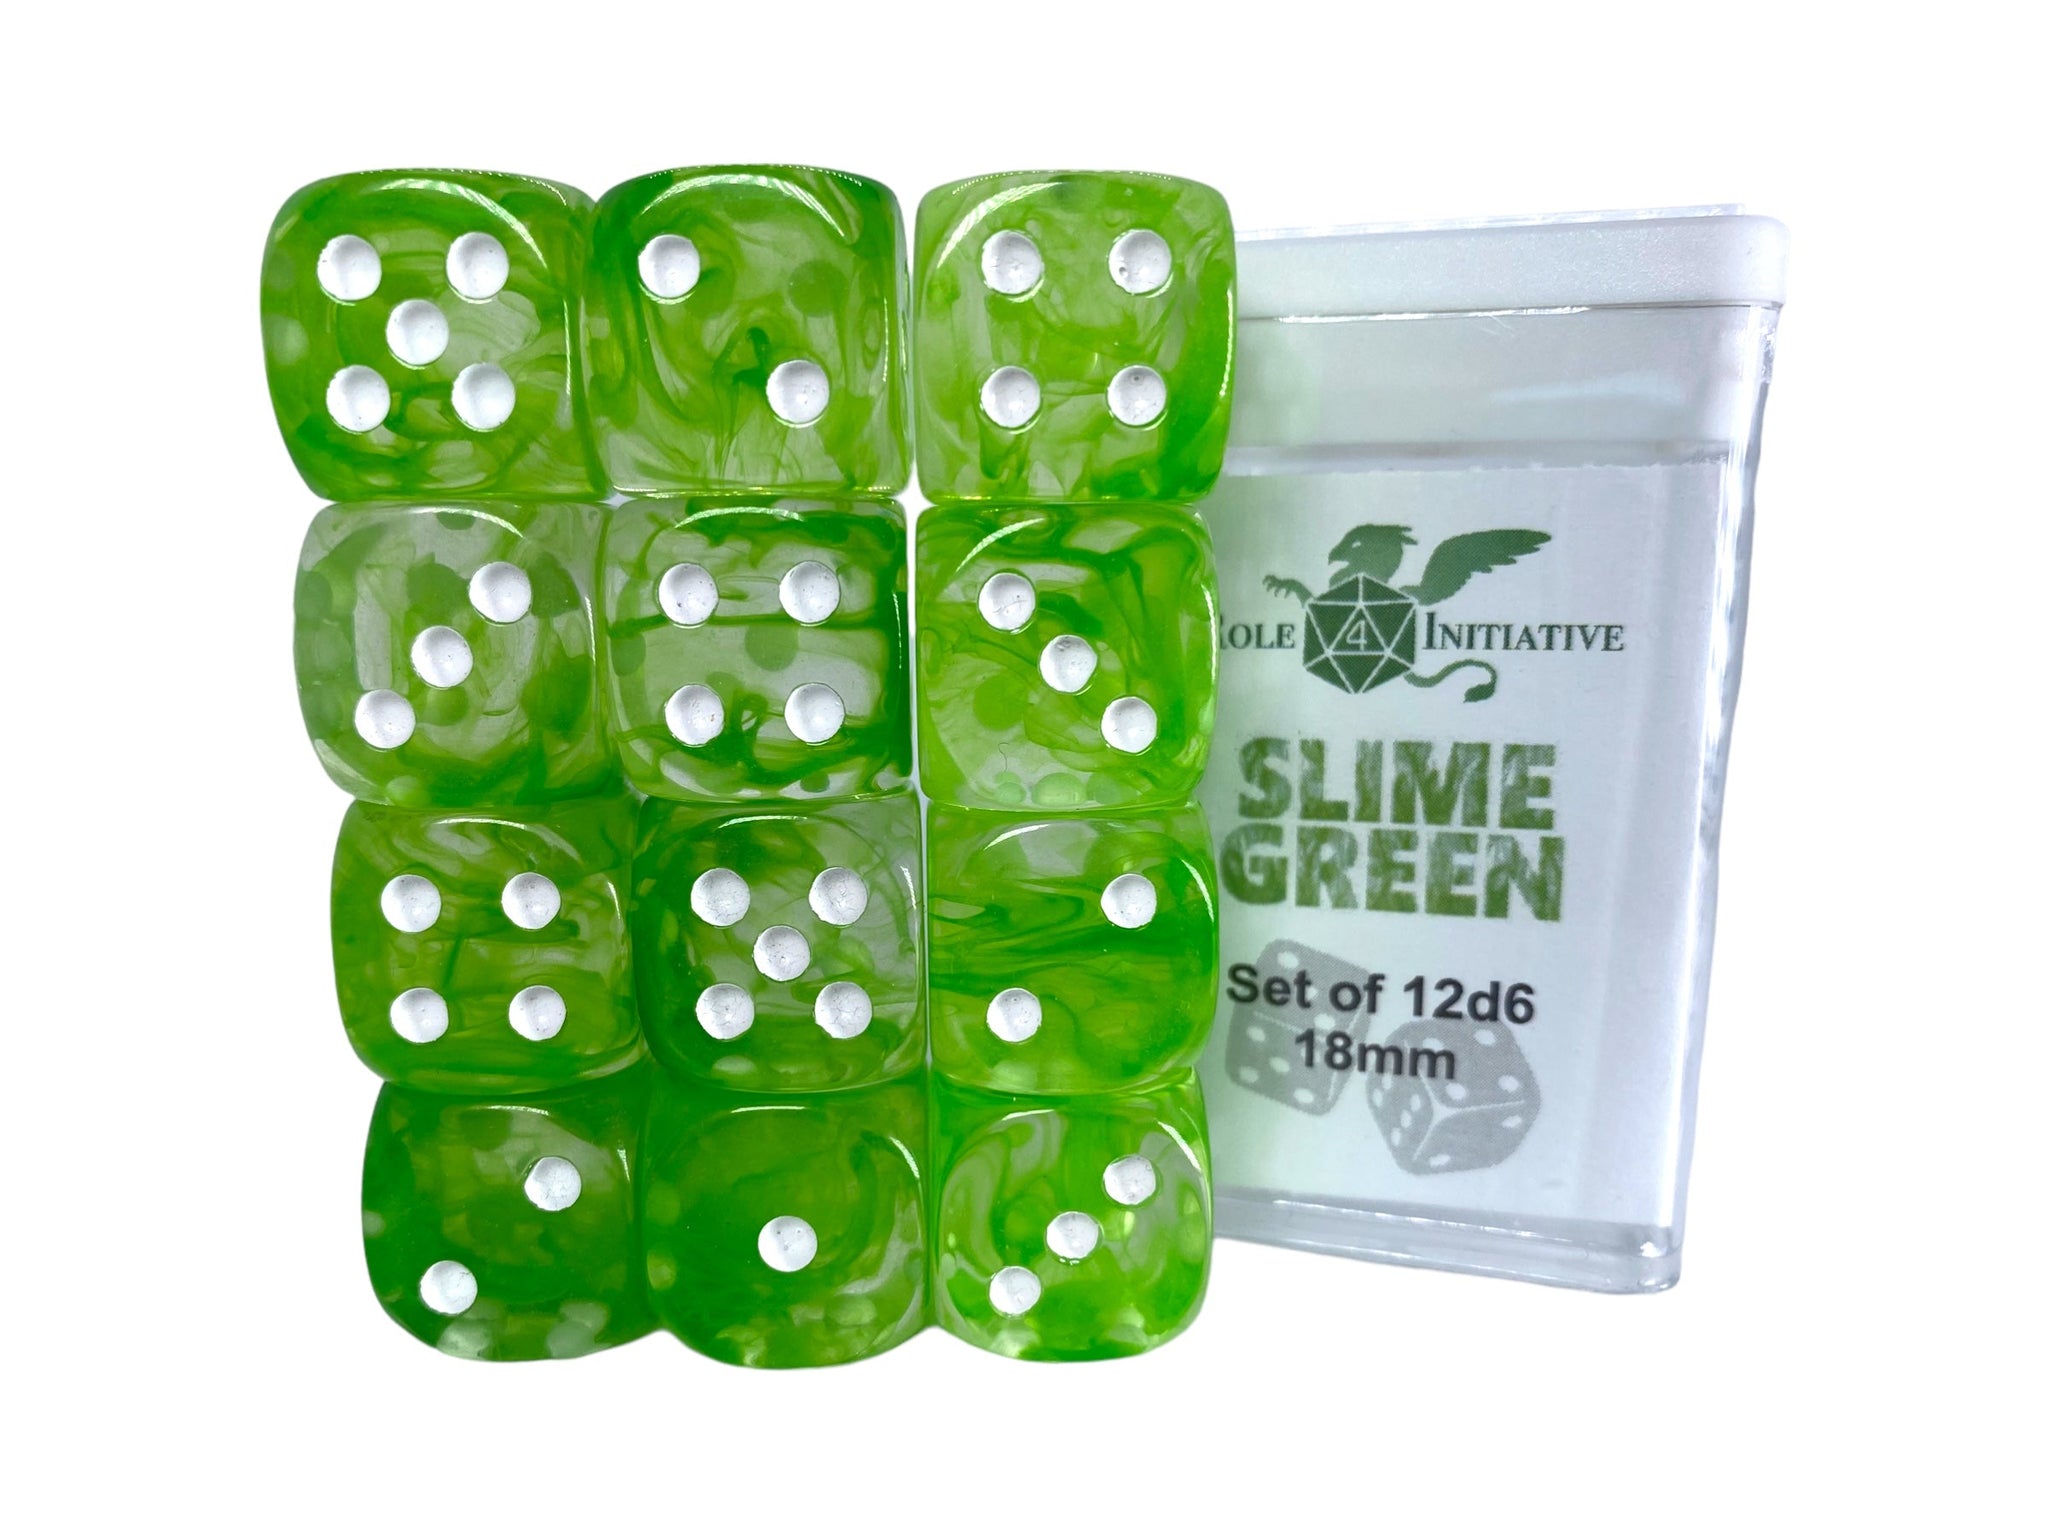 Set of 12d6 18mm w/ pips Diffusion Slime Green